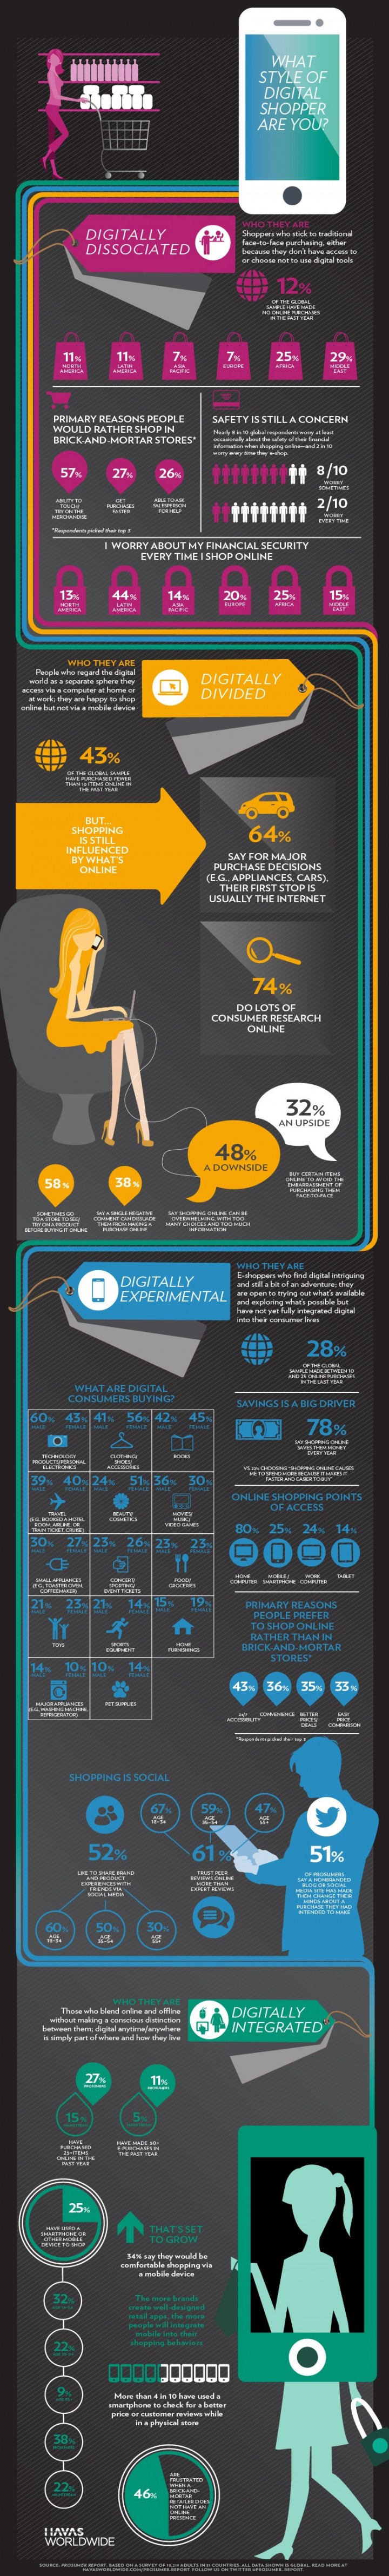 HWW-Digital-and-the-New-Consumer_Infographic.LR_